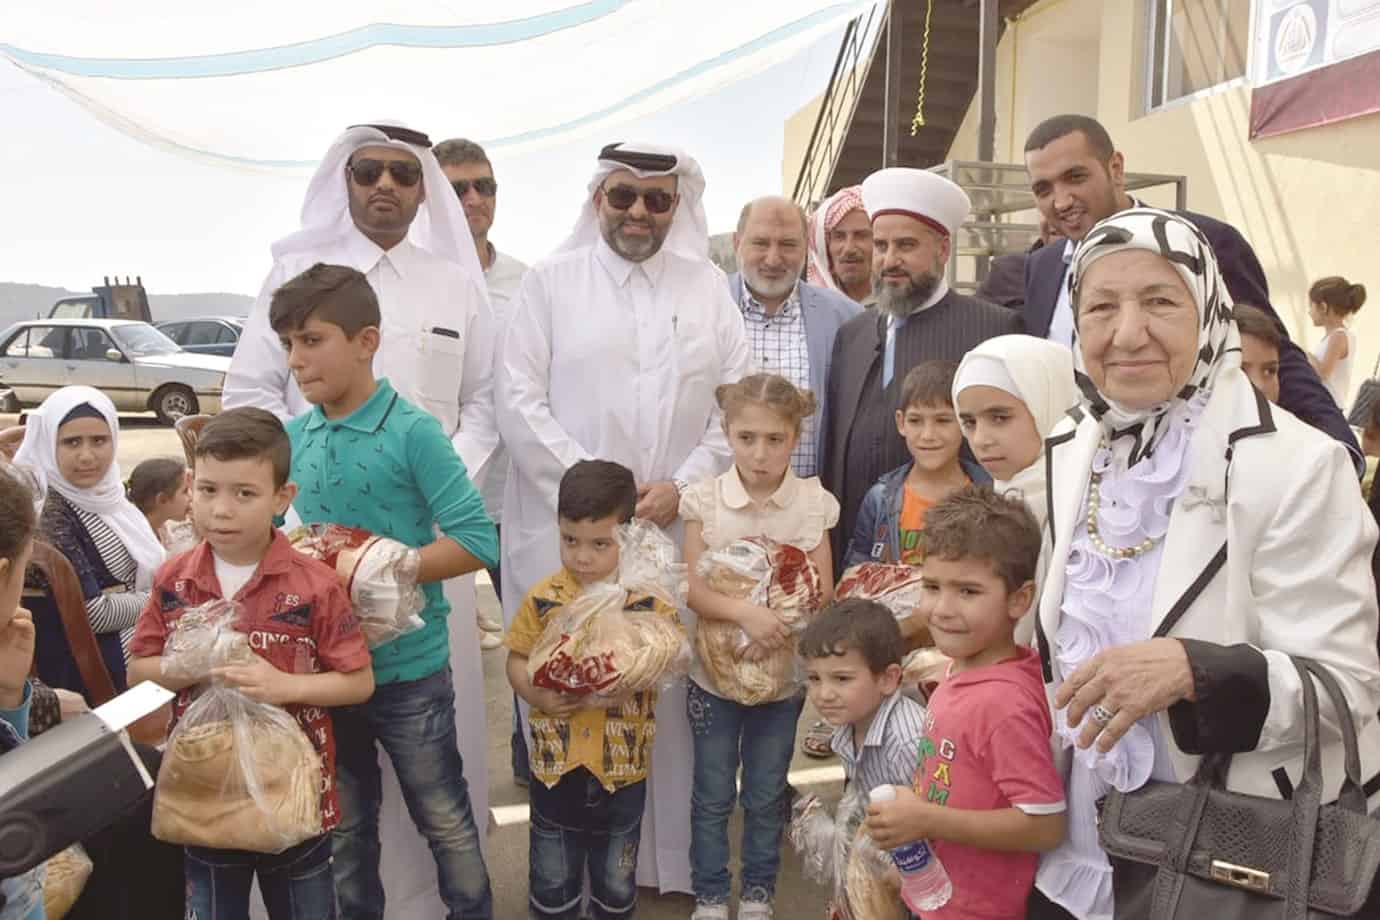 QC, NBK Charity open bakery for Syrian refugees